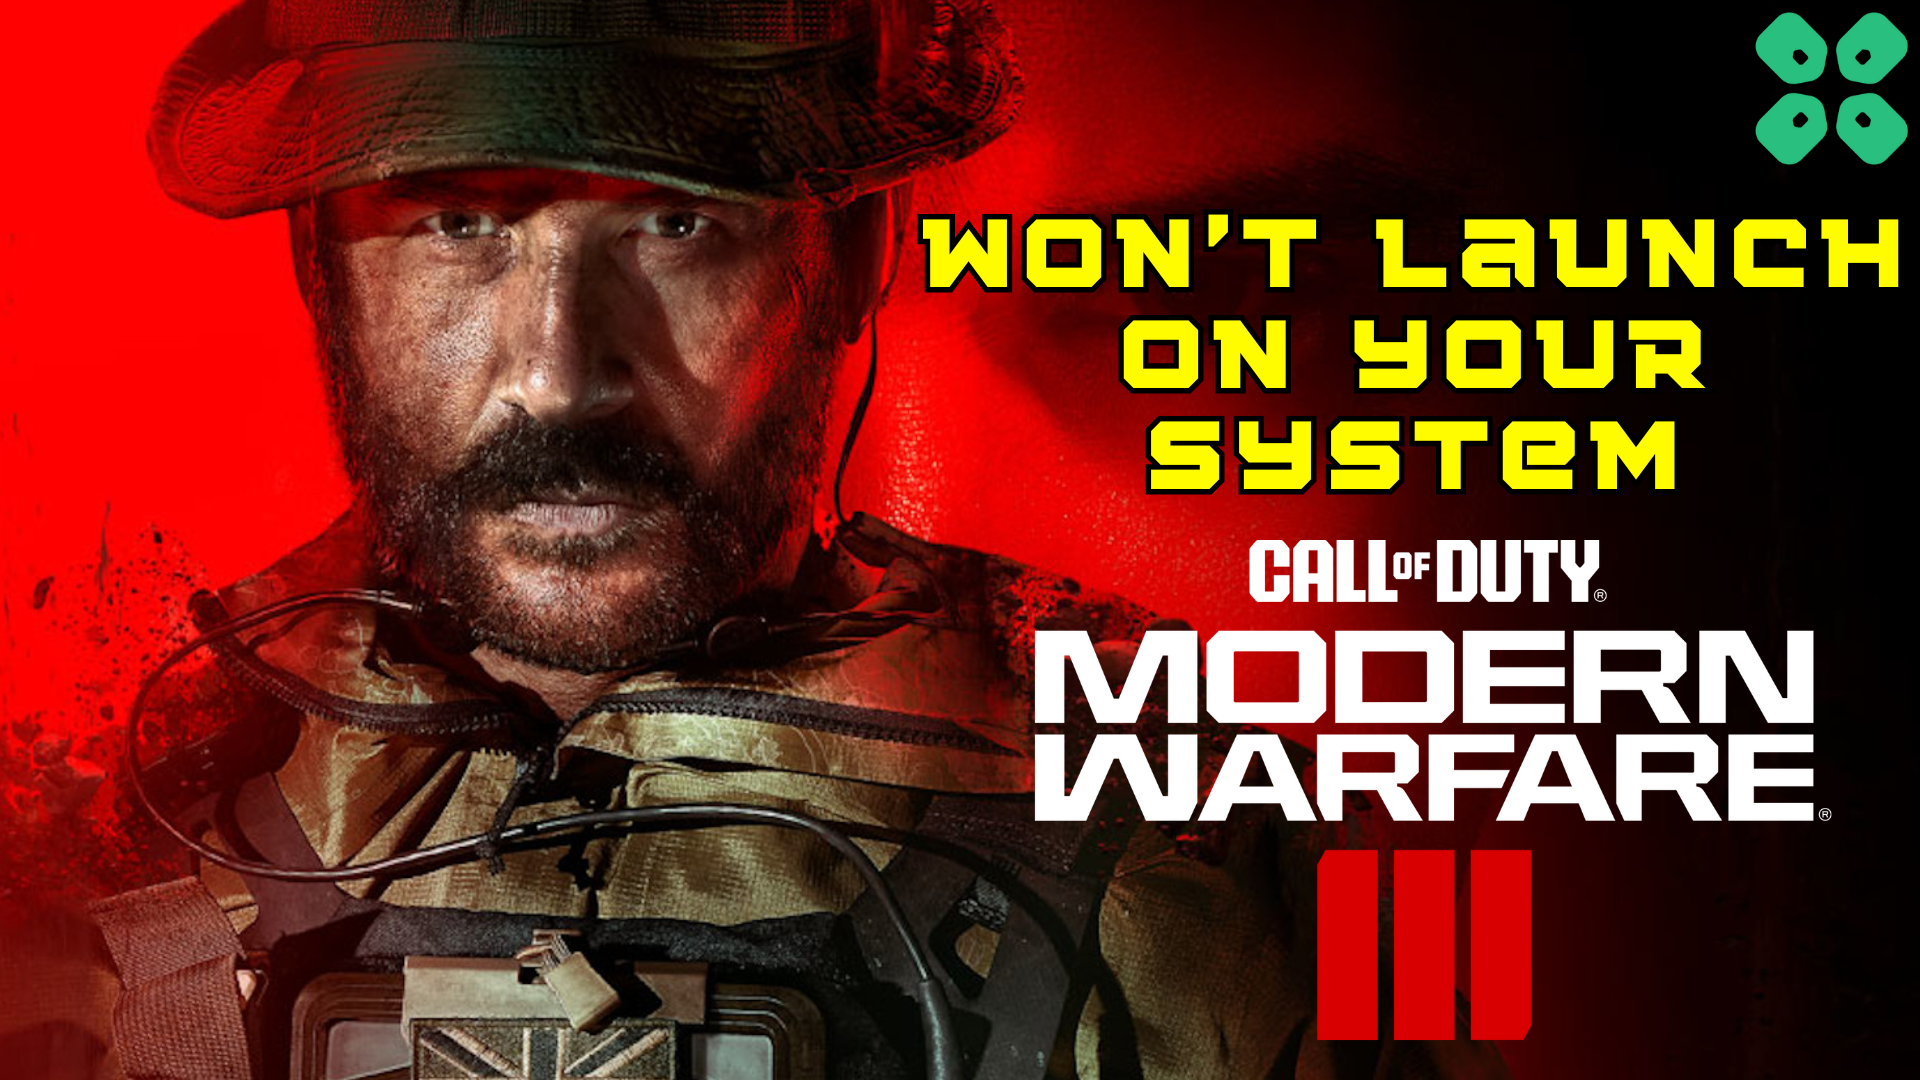 How to Fix Call of Duty MW3 won't launch on your system error